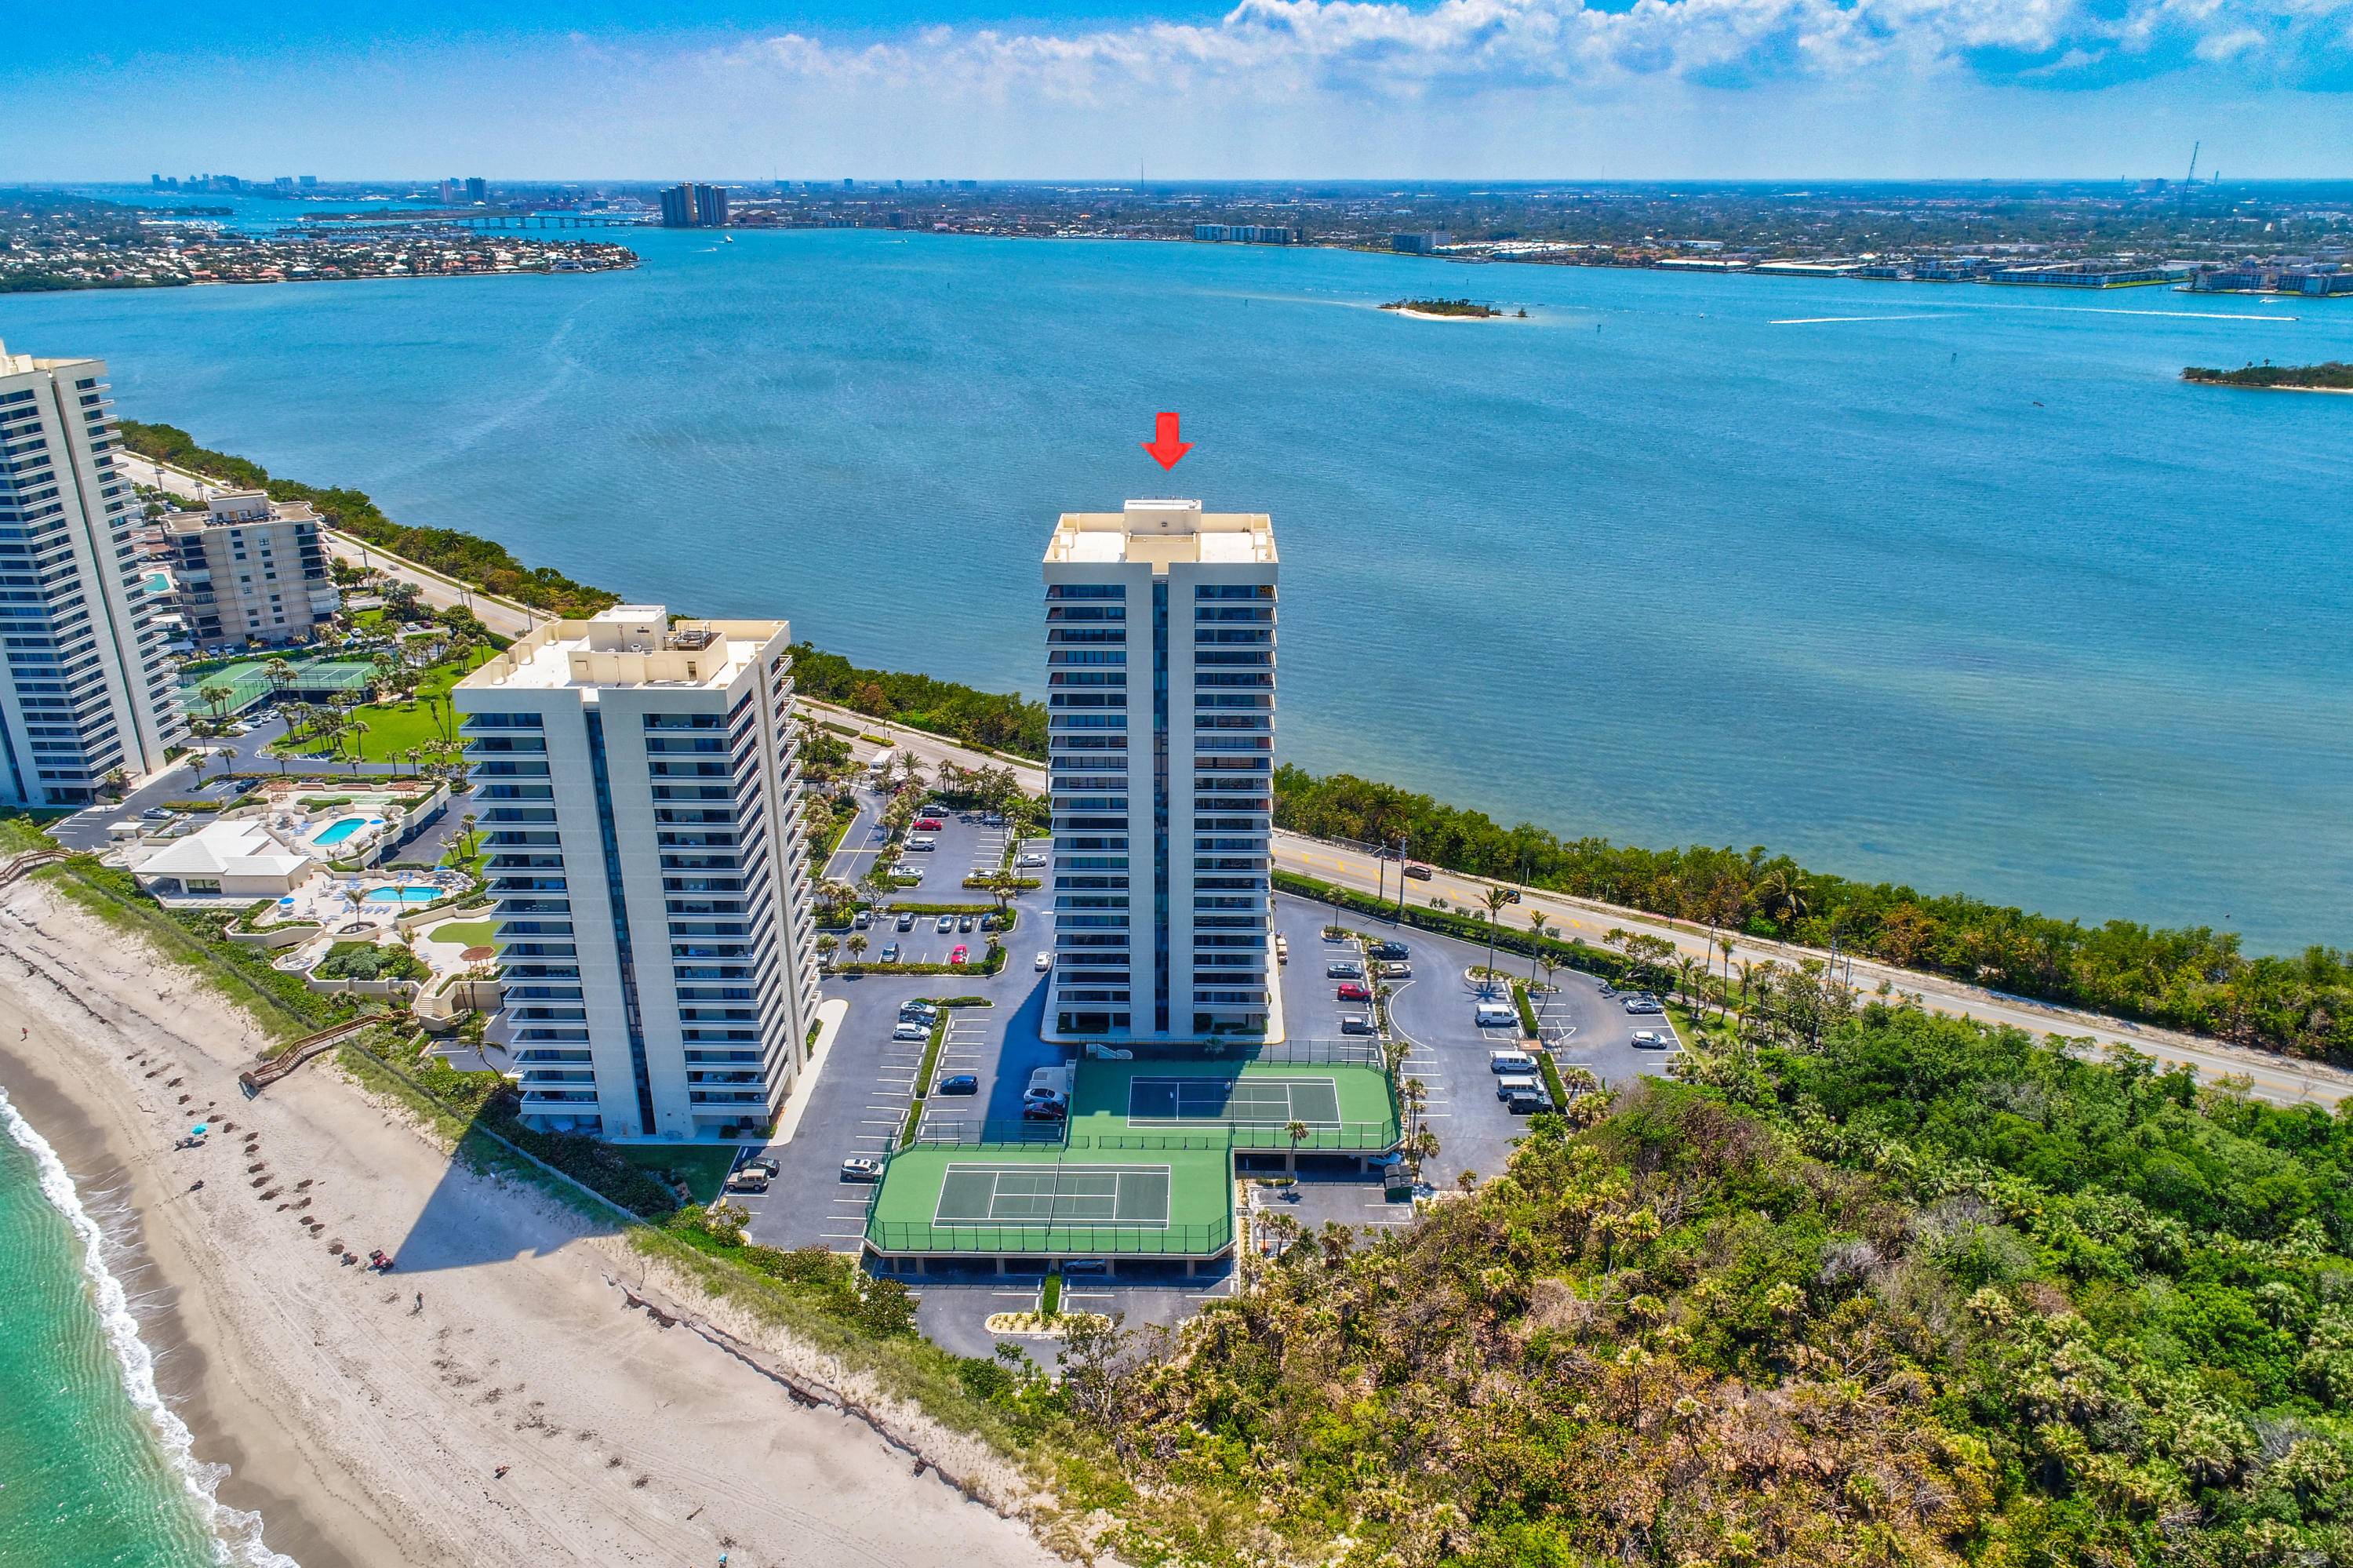 THIS 2ND FLOOR UNIT OFFERS VIEWS OF OCEAN AND INTERCOSTAL WATERWAYS FROM YOUR 57 FOOT WRAP AROUND BALCONY.